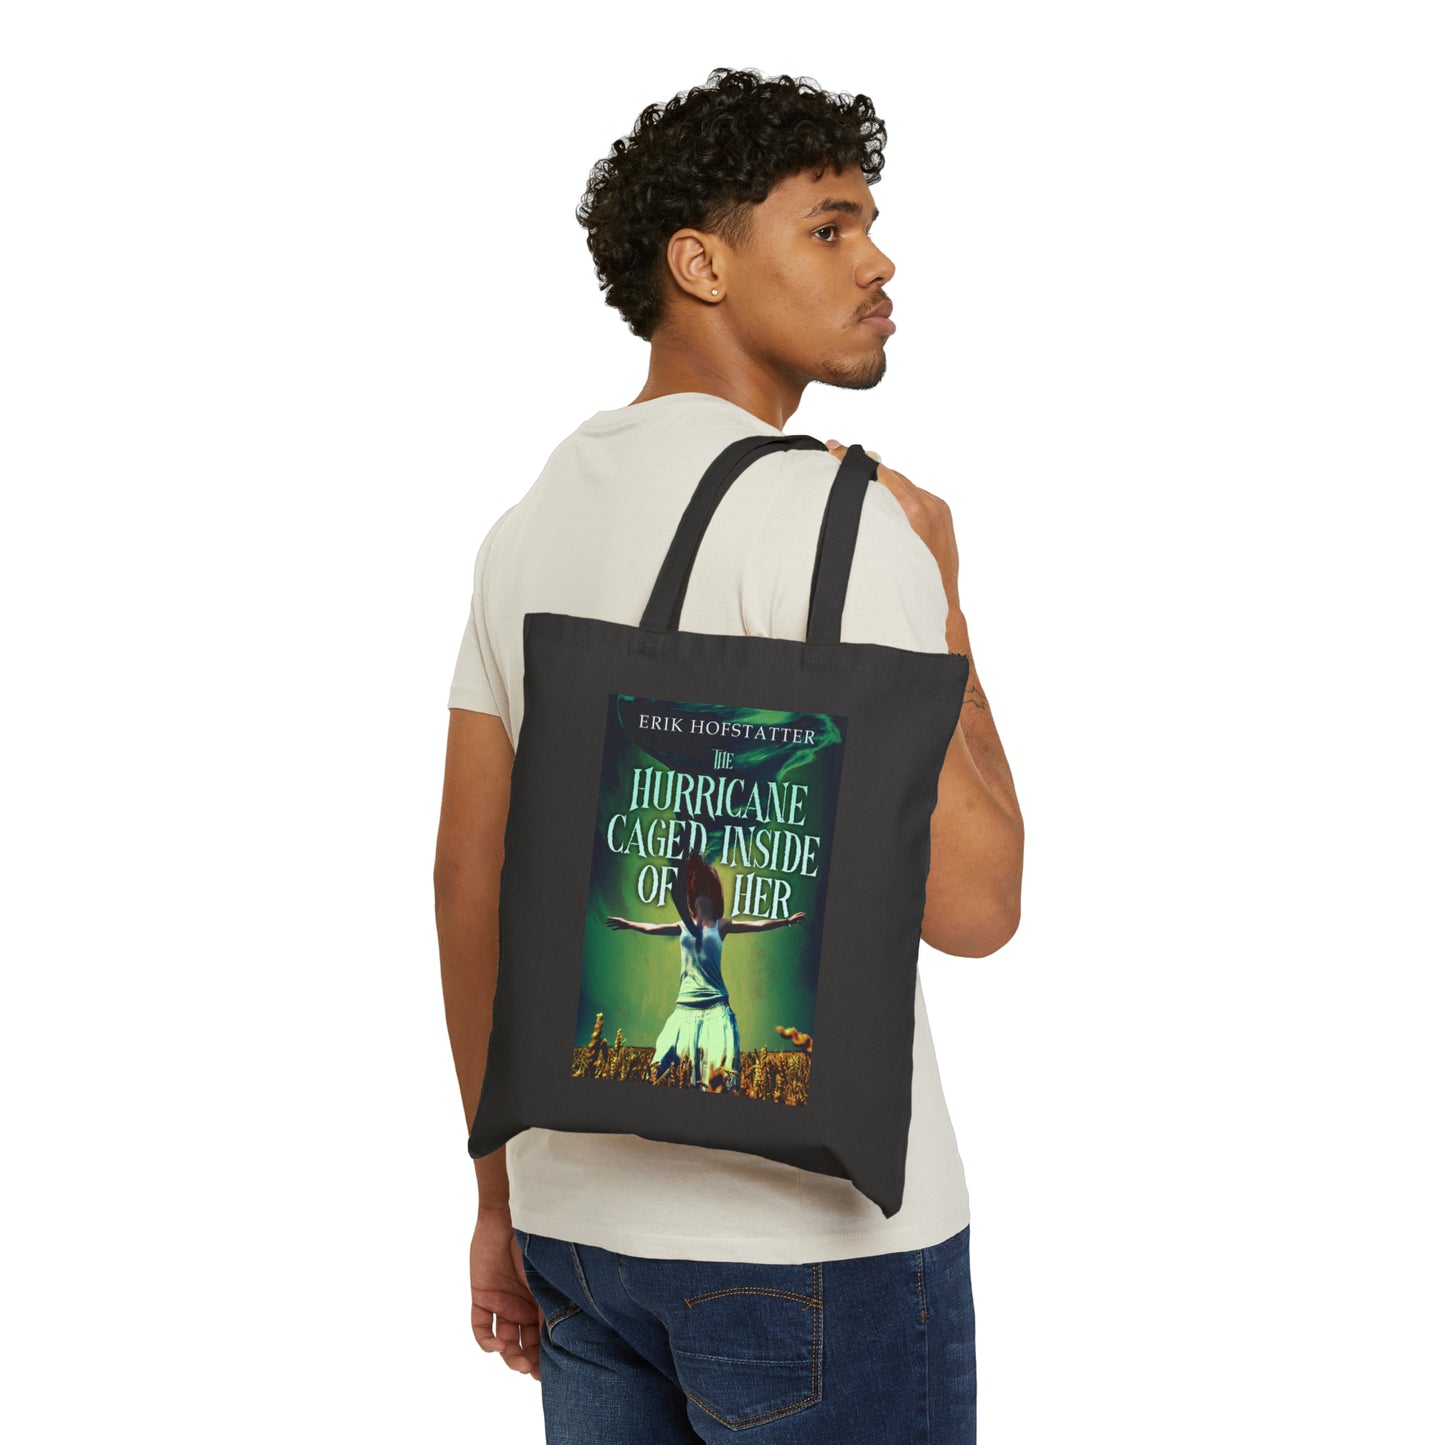 The Hurricane Caged Inside of Her - Cotton Canvas Tote Bag